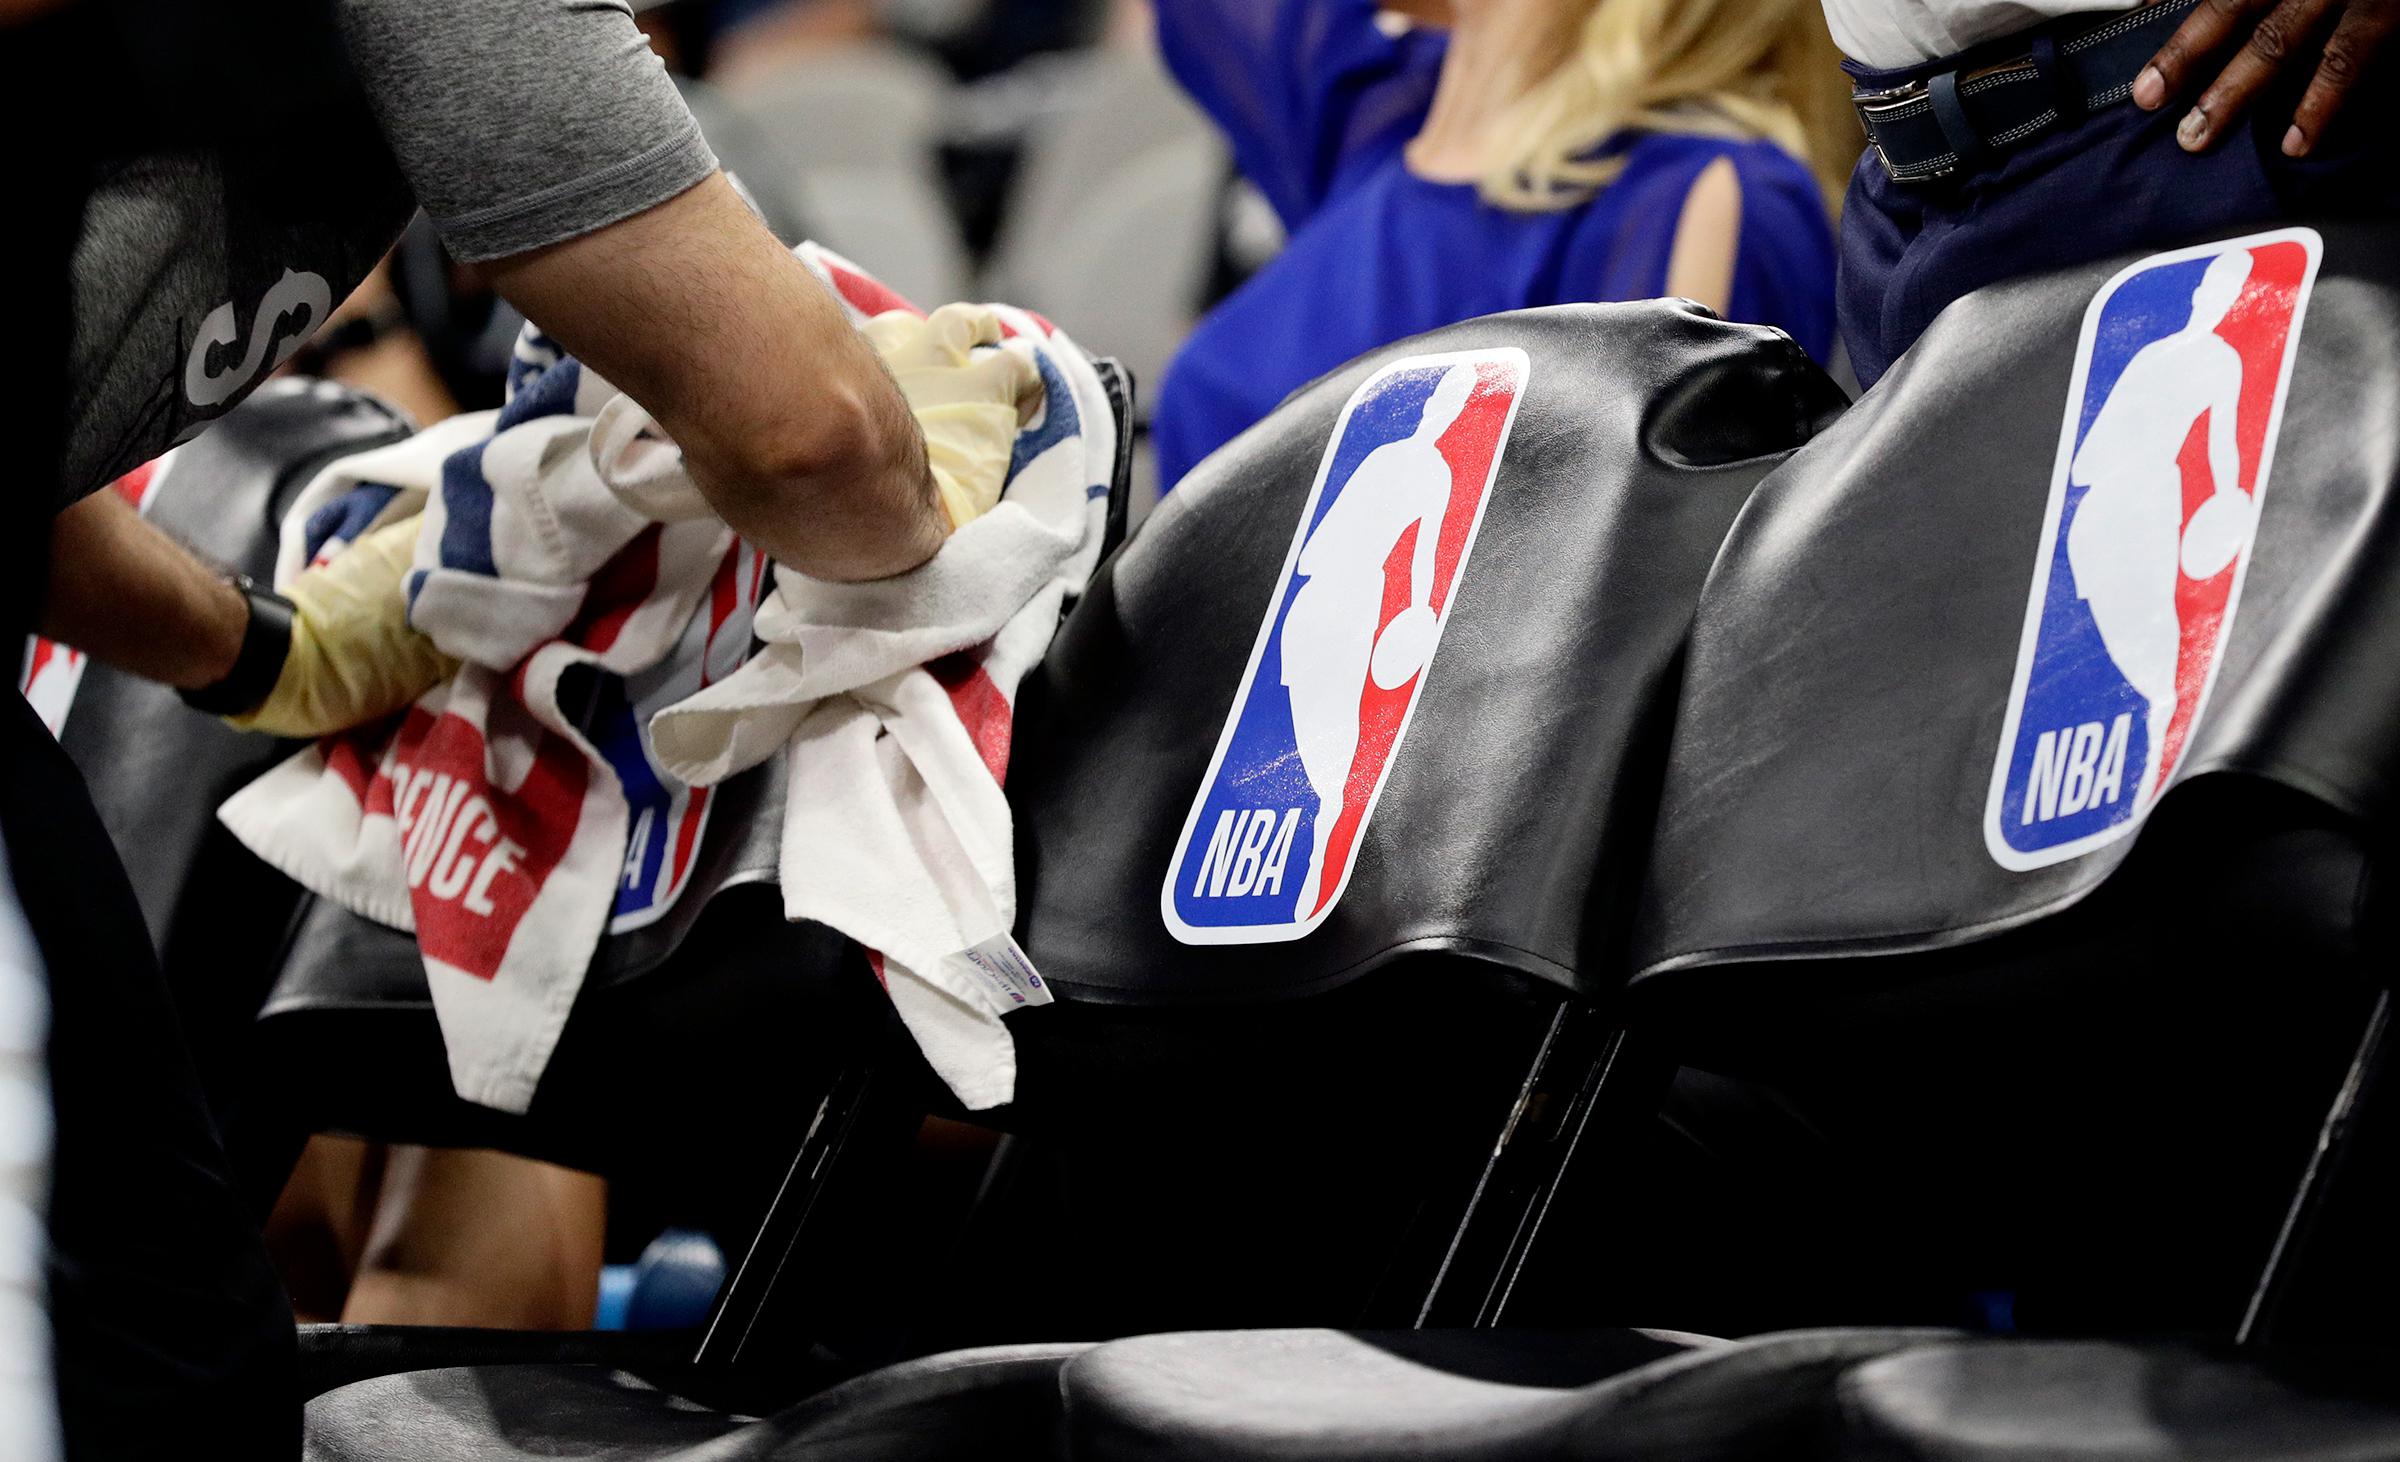 NBA Tightens COVID-19 Protocols After Multiple Positive Tests